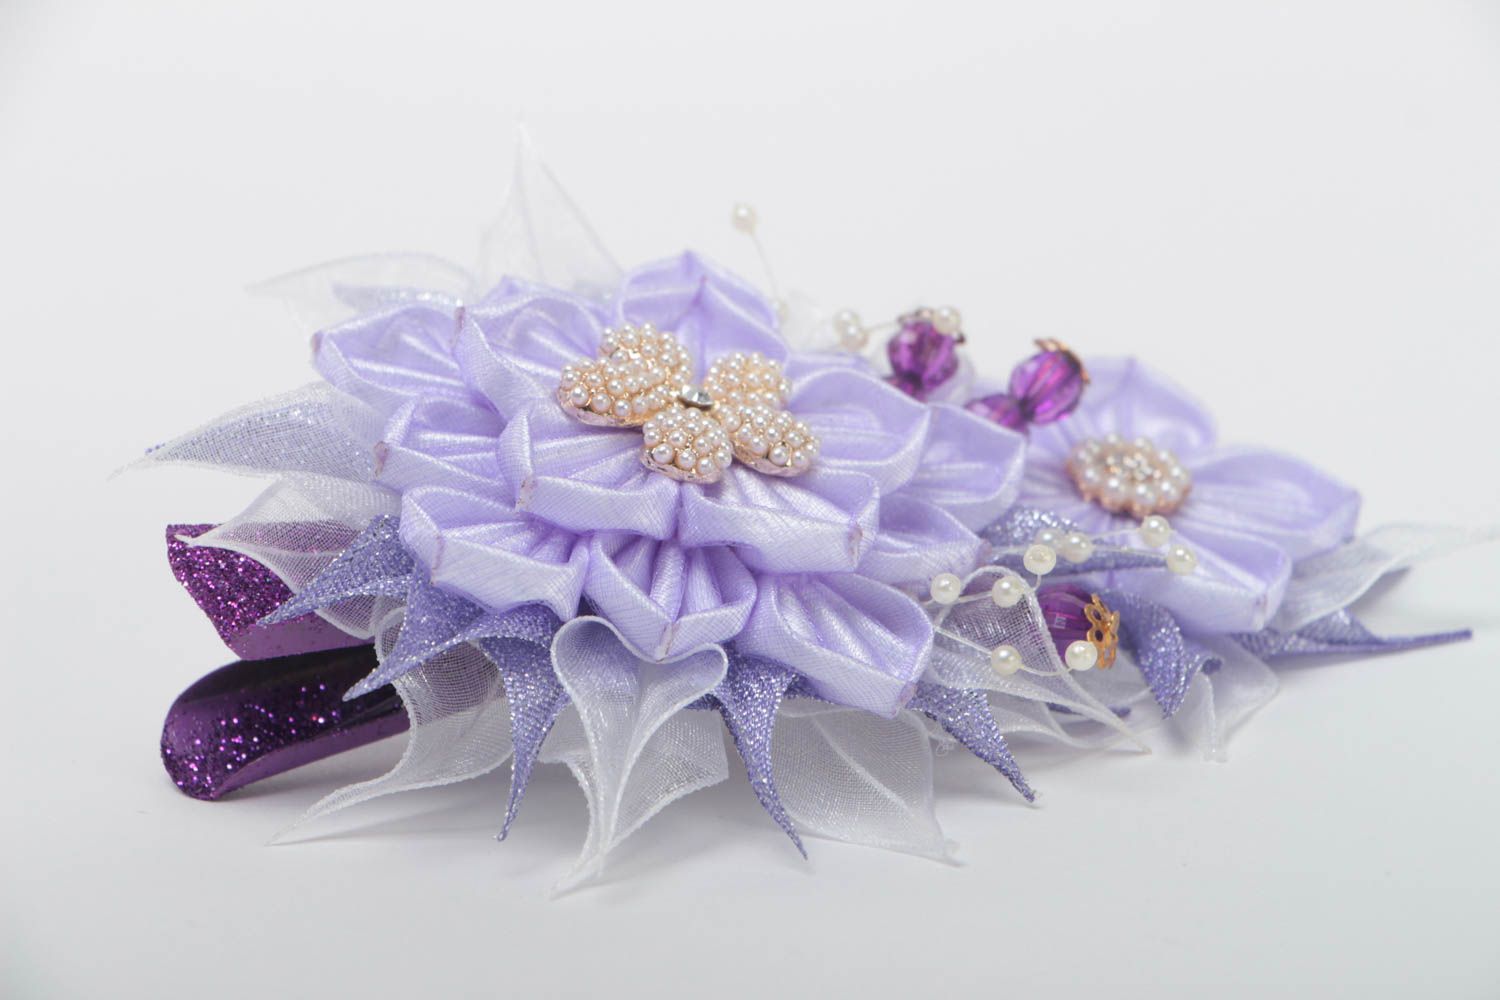 Handcrafted textile flower barrette kanzashi ideas handmade gifts for her photo 3